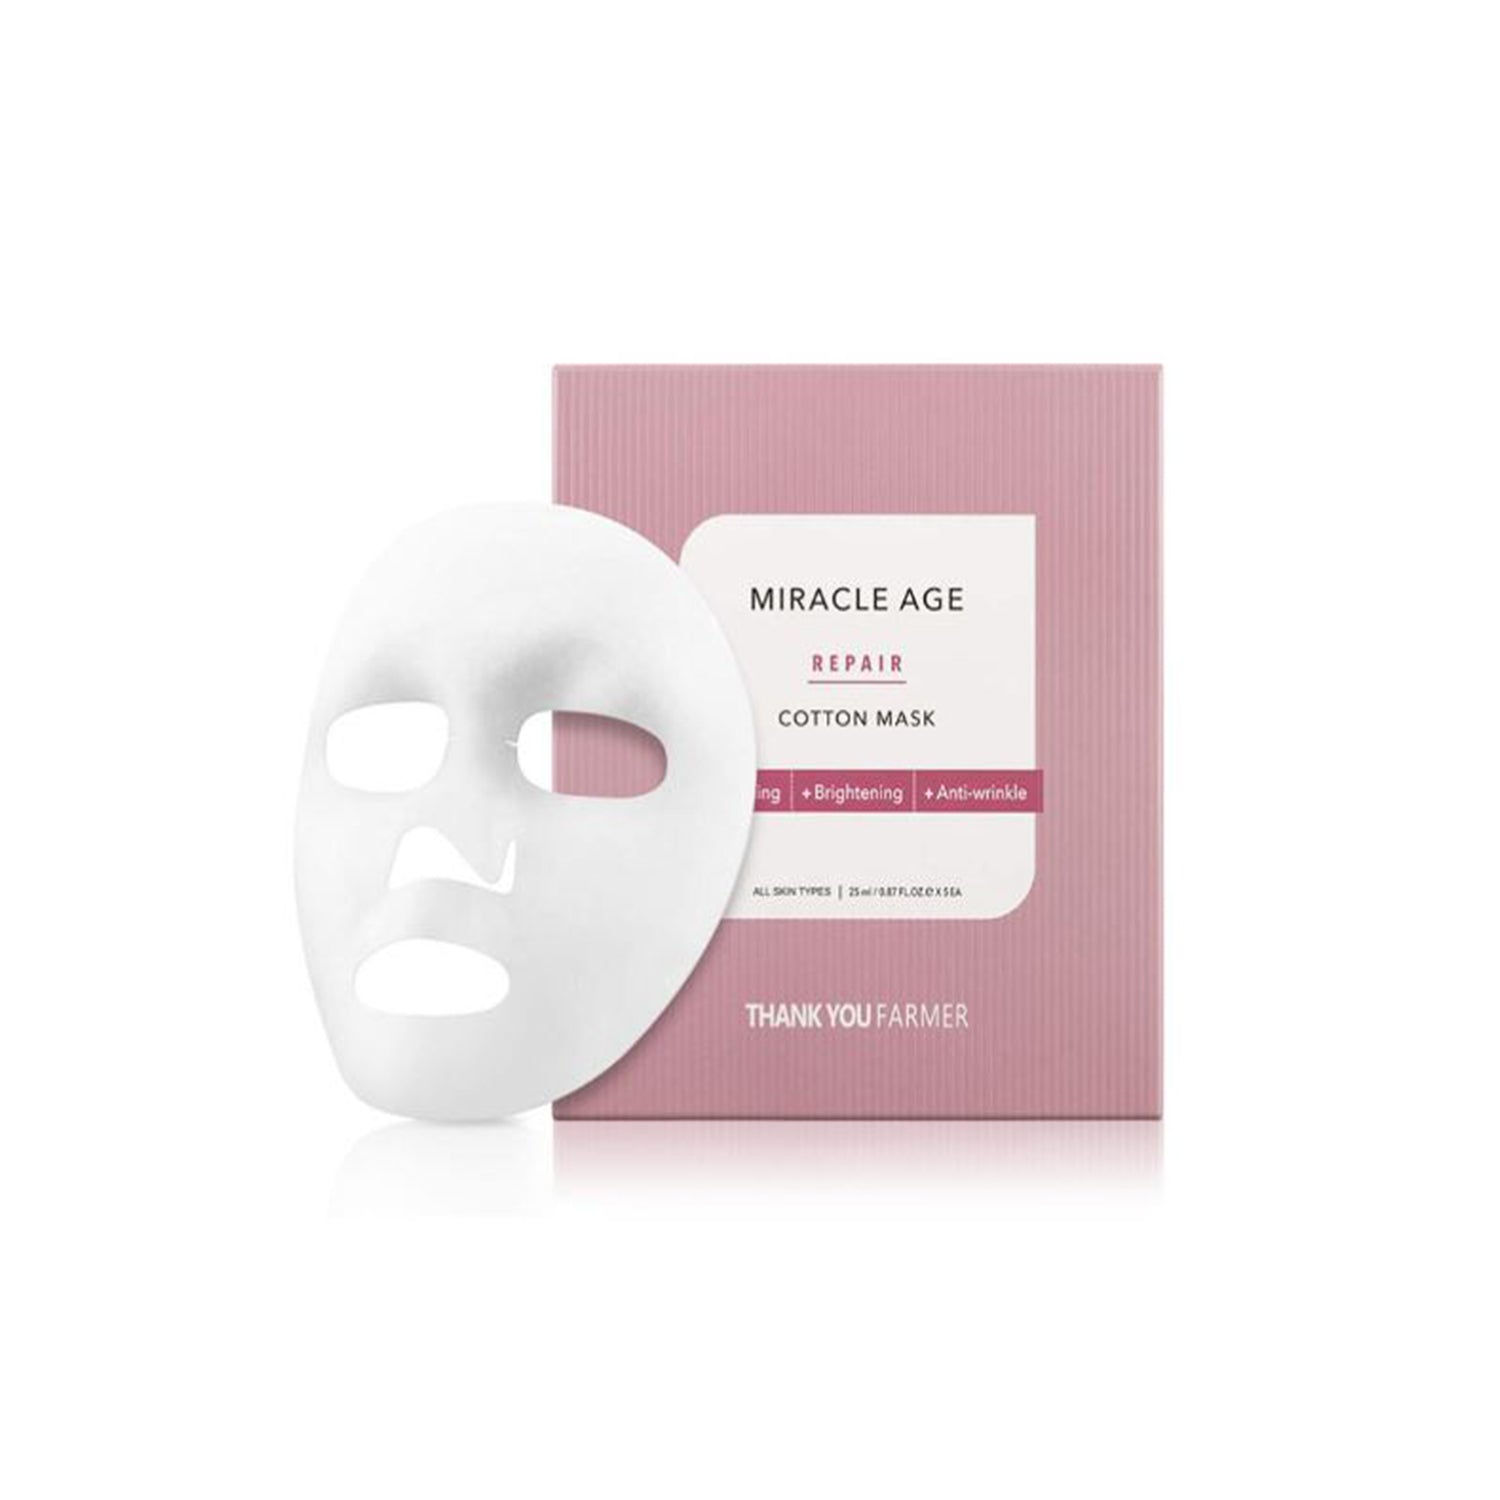 Miracle Age Repair Cotton Mask